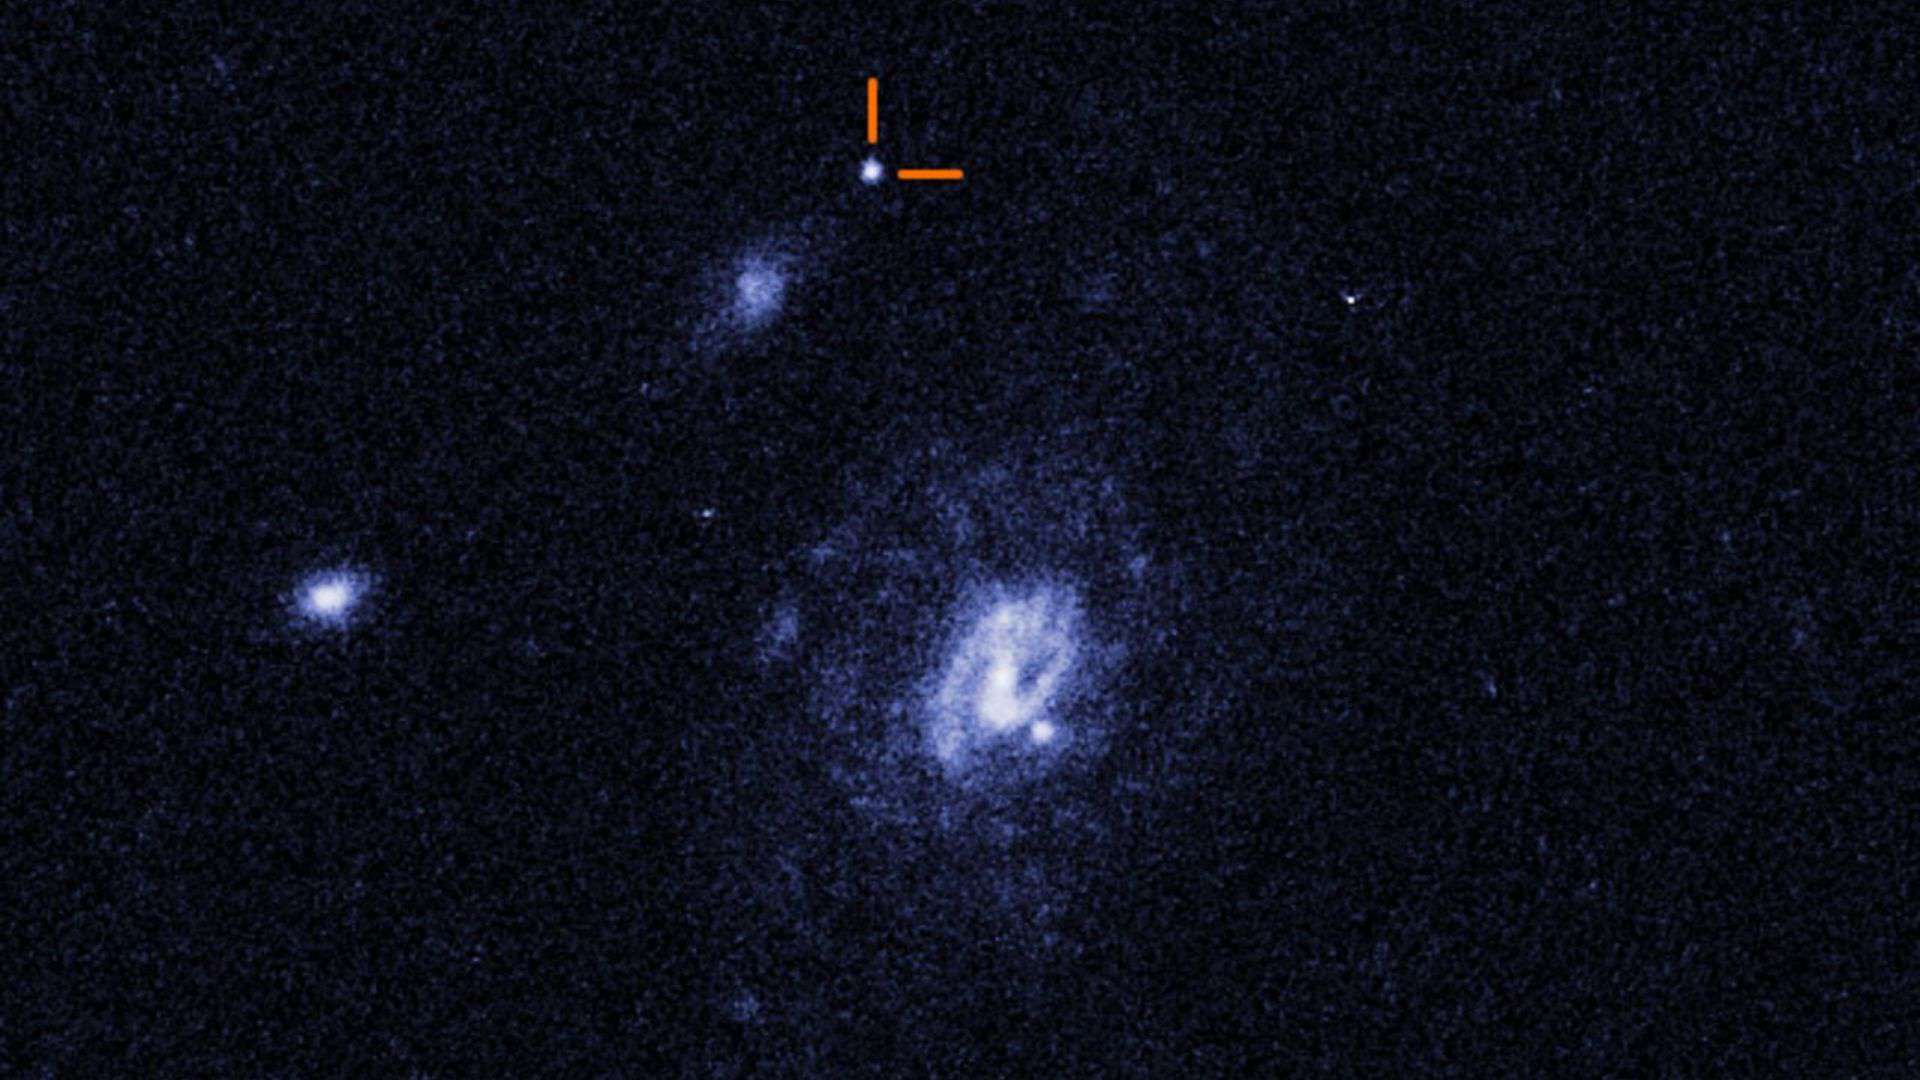 Hubble Space Telescope shows the location of the newly discovered LFBOT the Finch